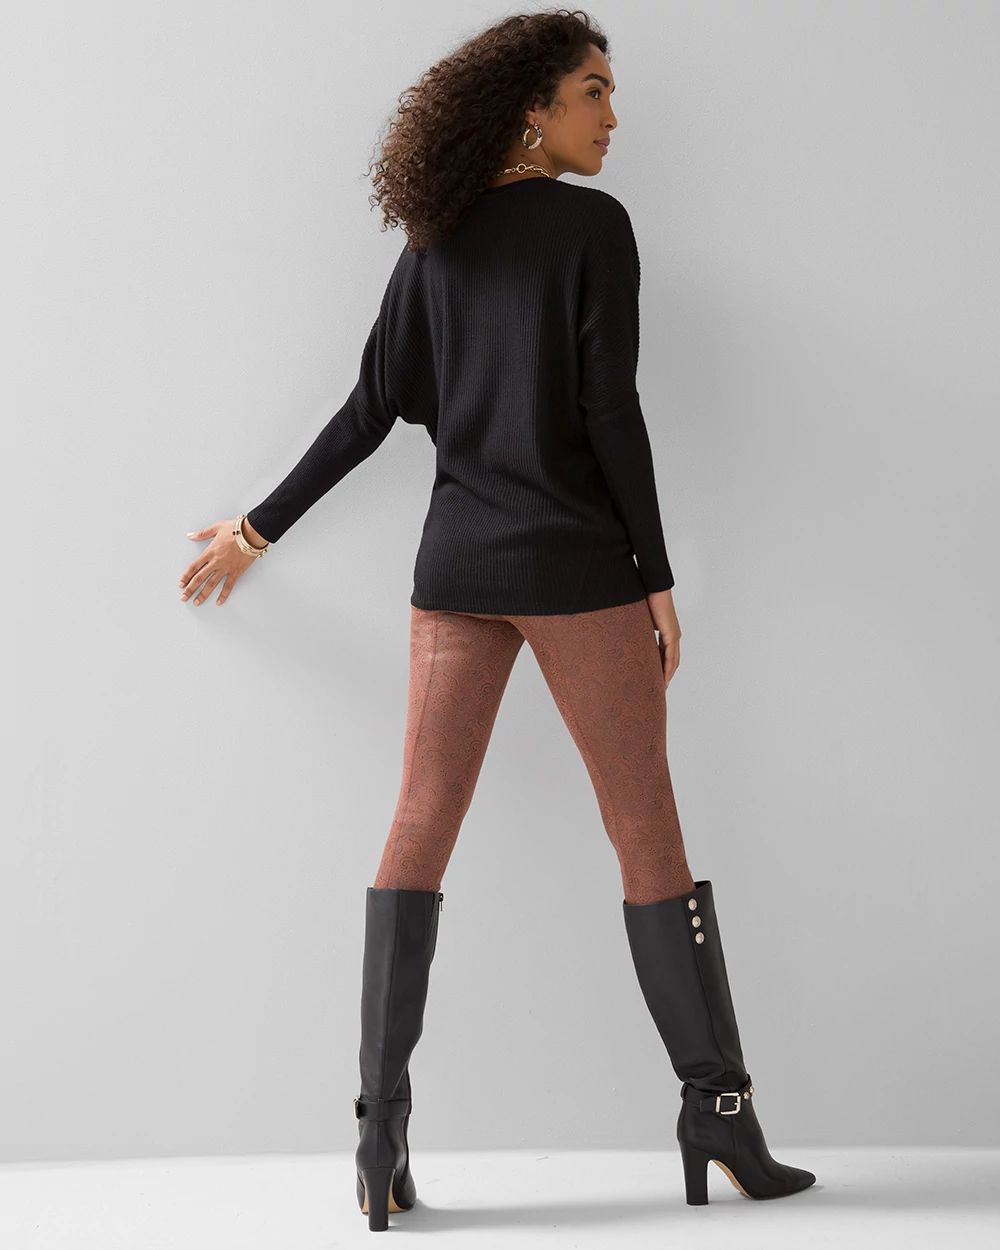 Ribbed Dolman Tunic click to view larger image.